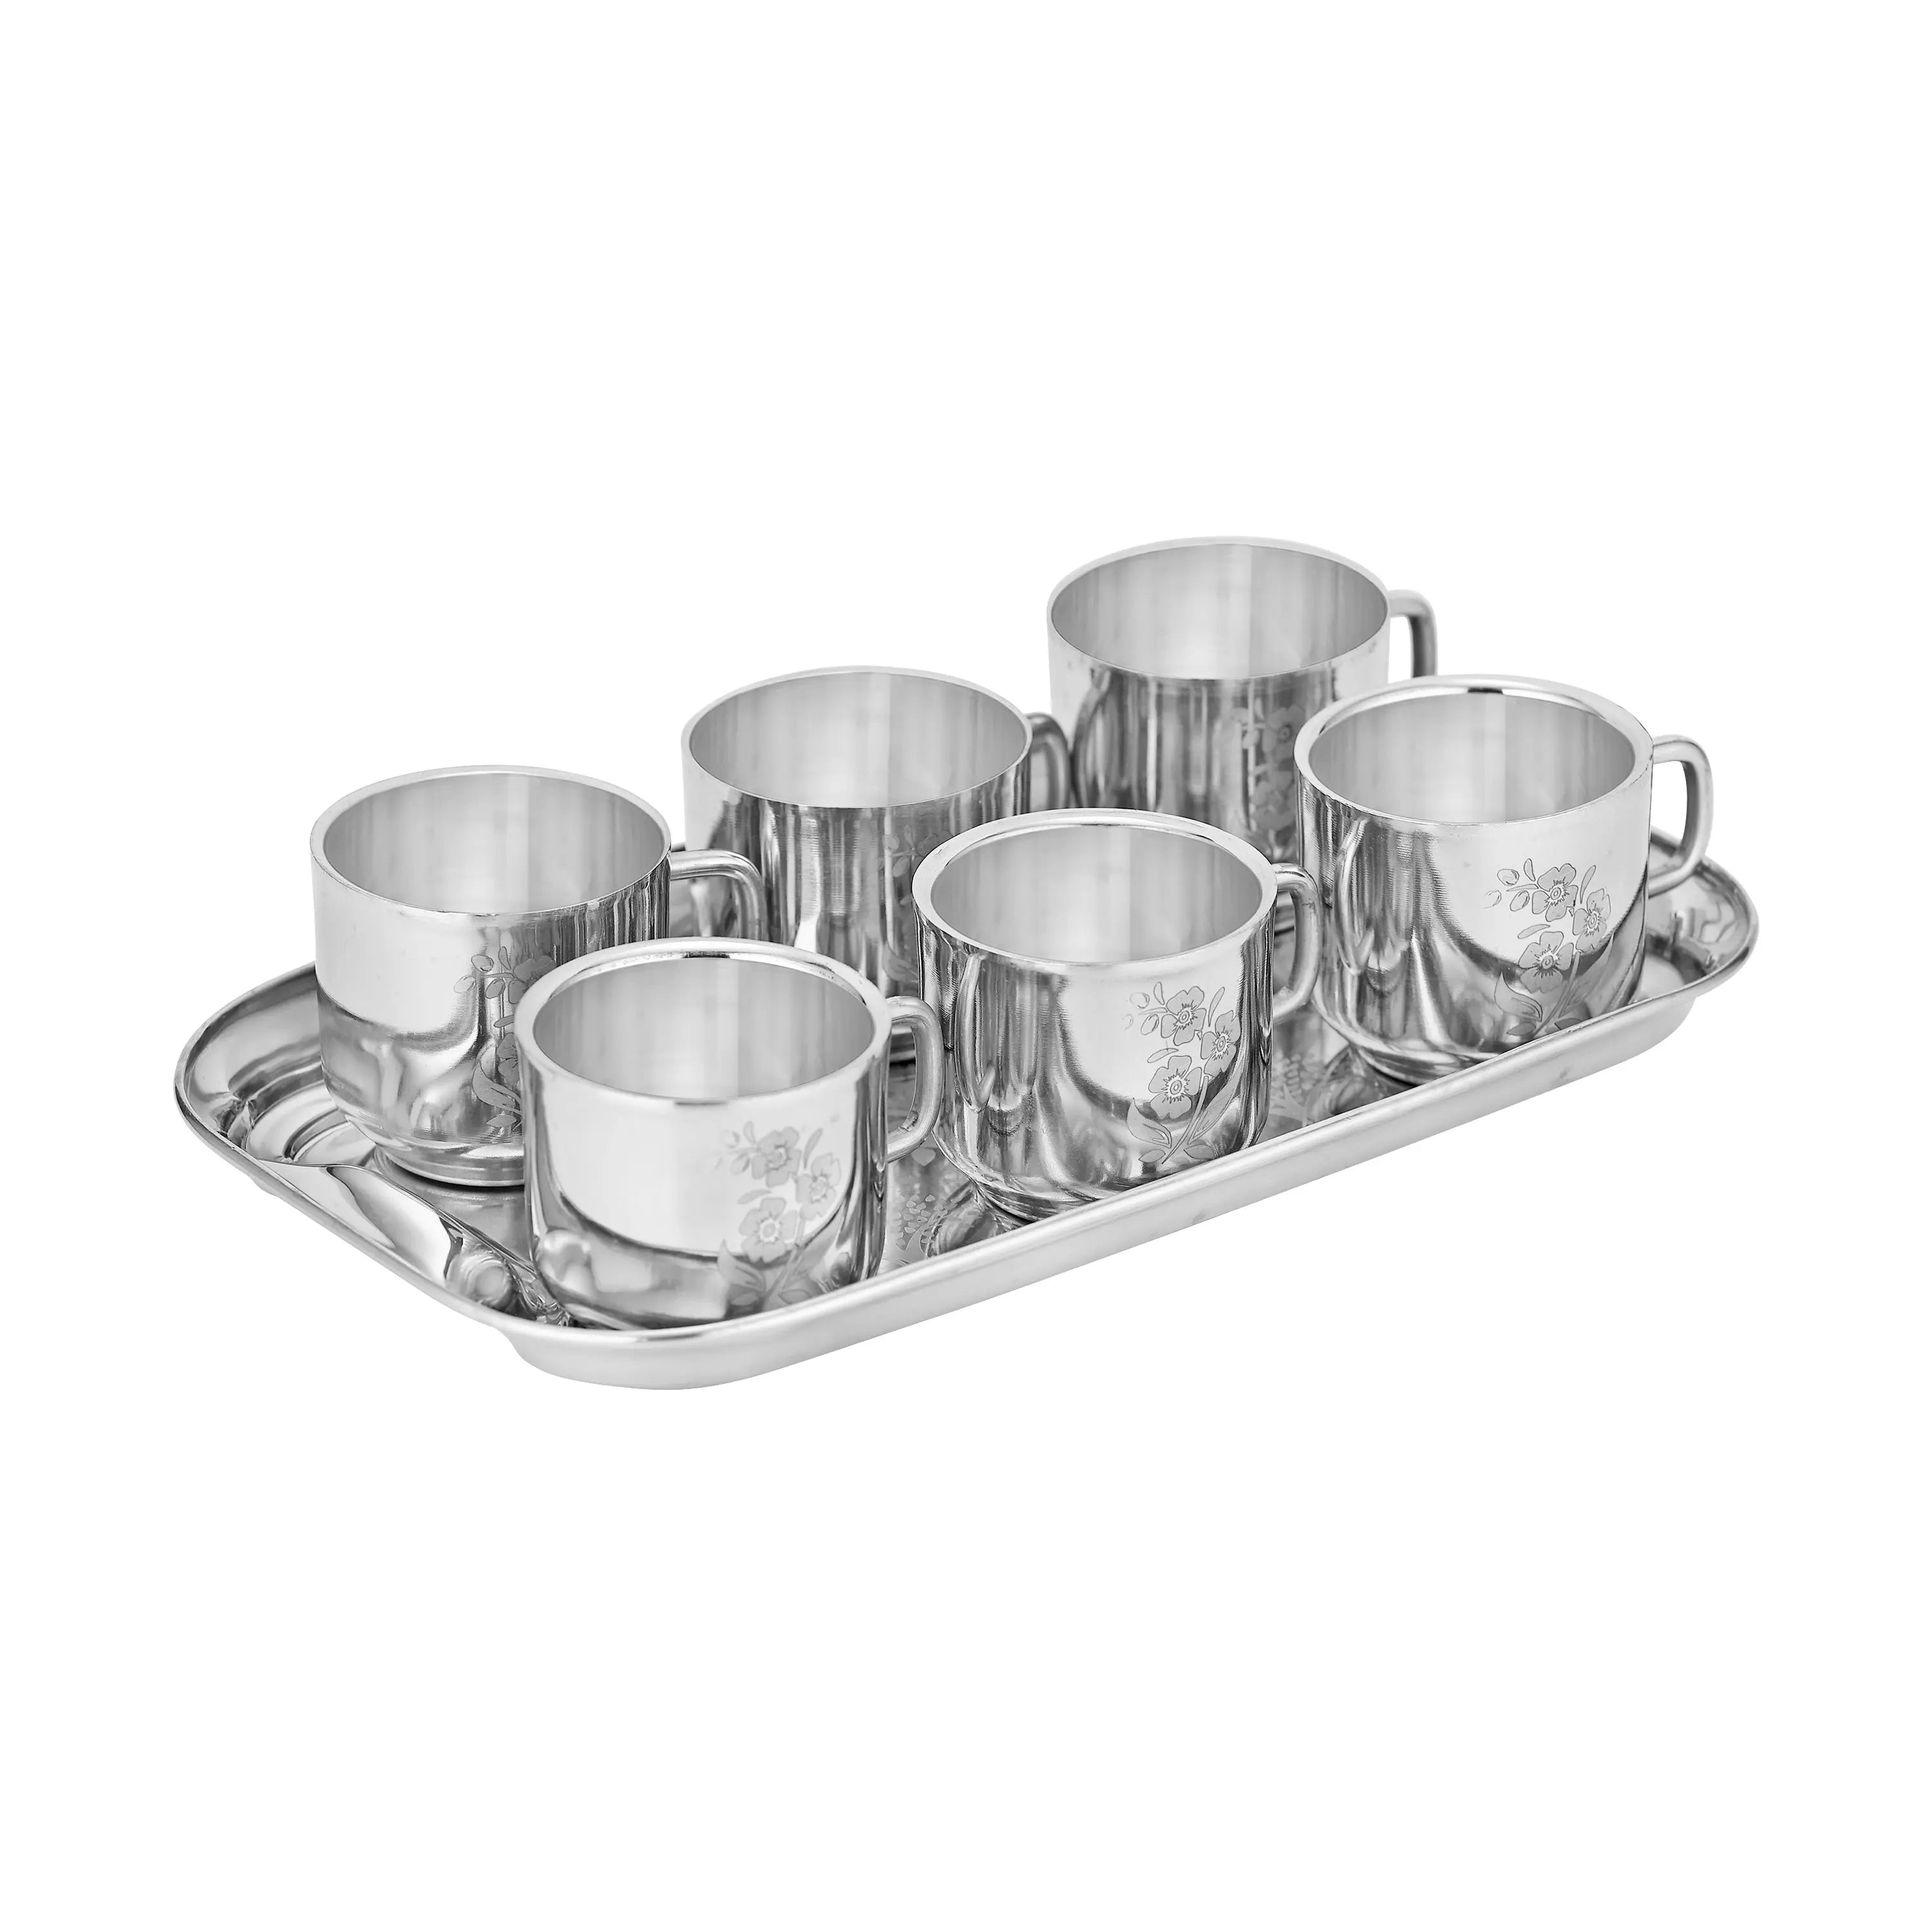 STAINLESS STEEL CUP SAUCER SET 7 PC WITH TRAY - CROCKERY WALA AND COMPANY 